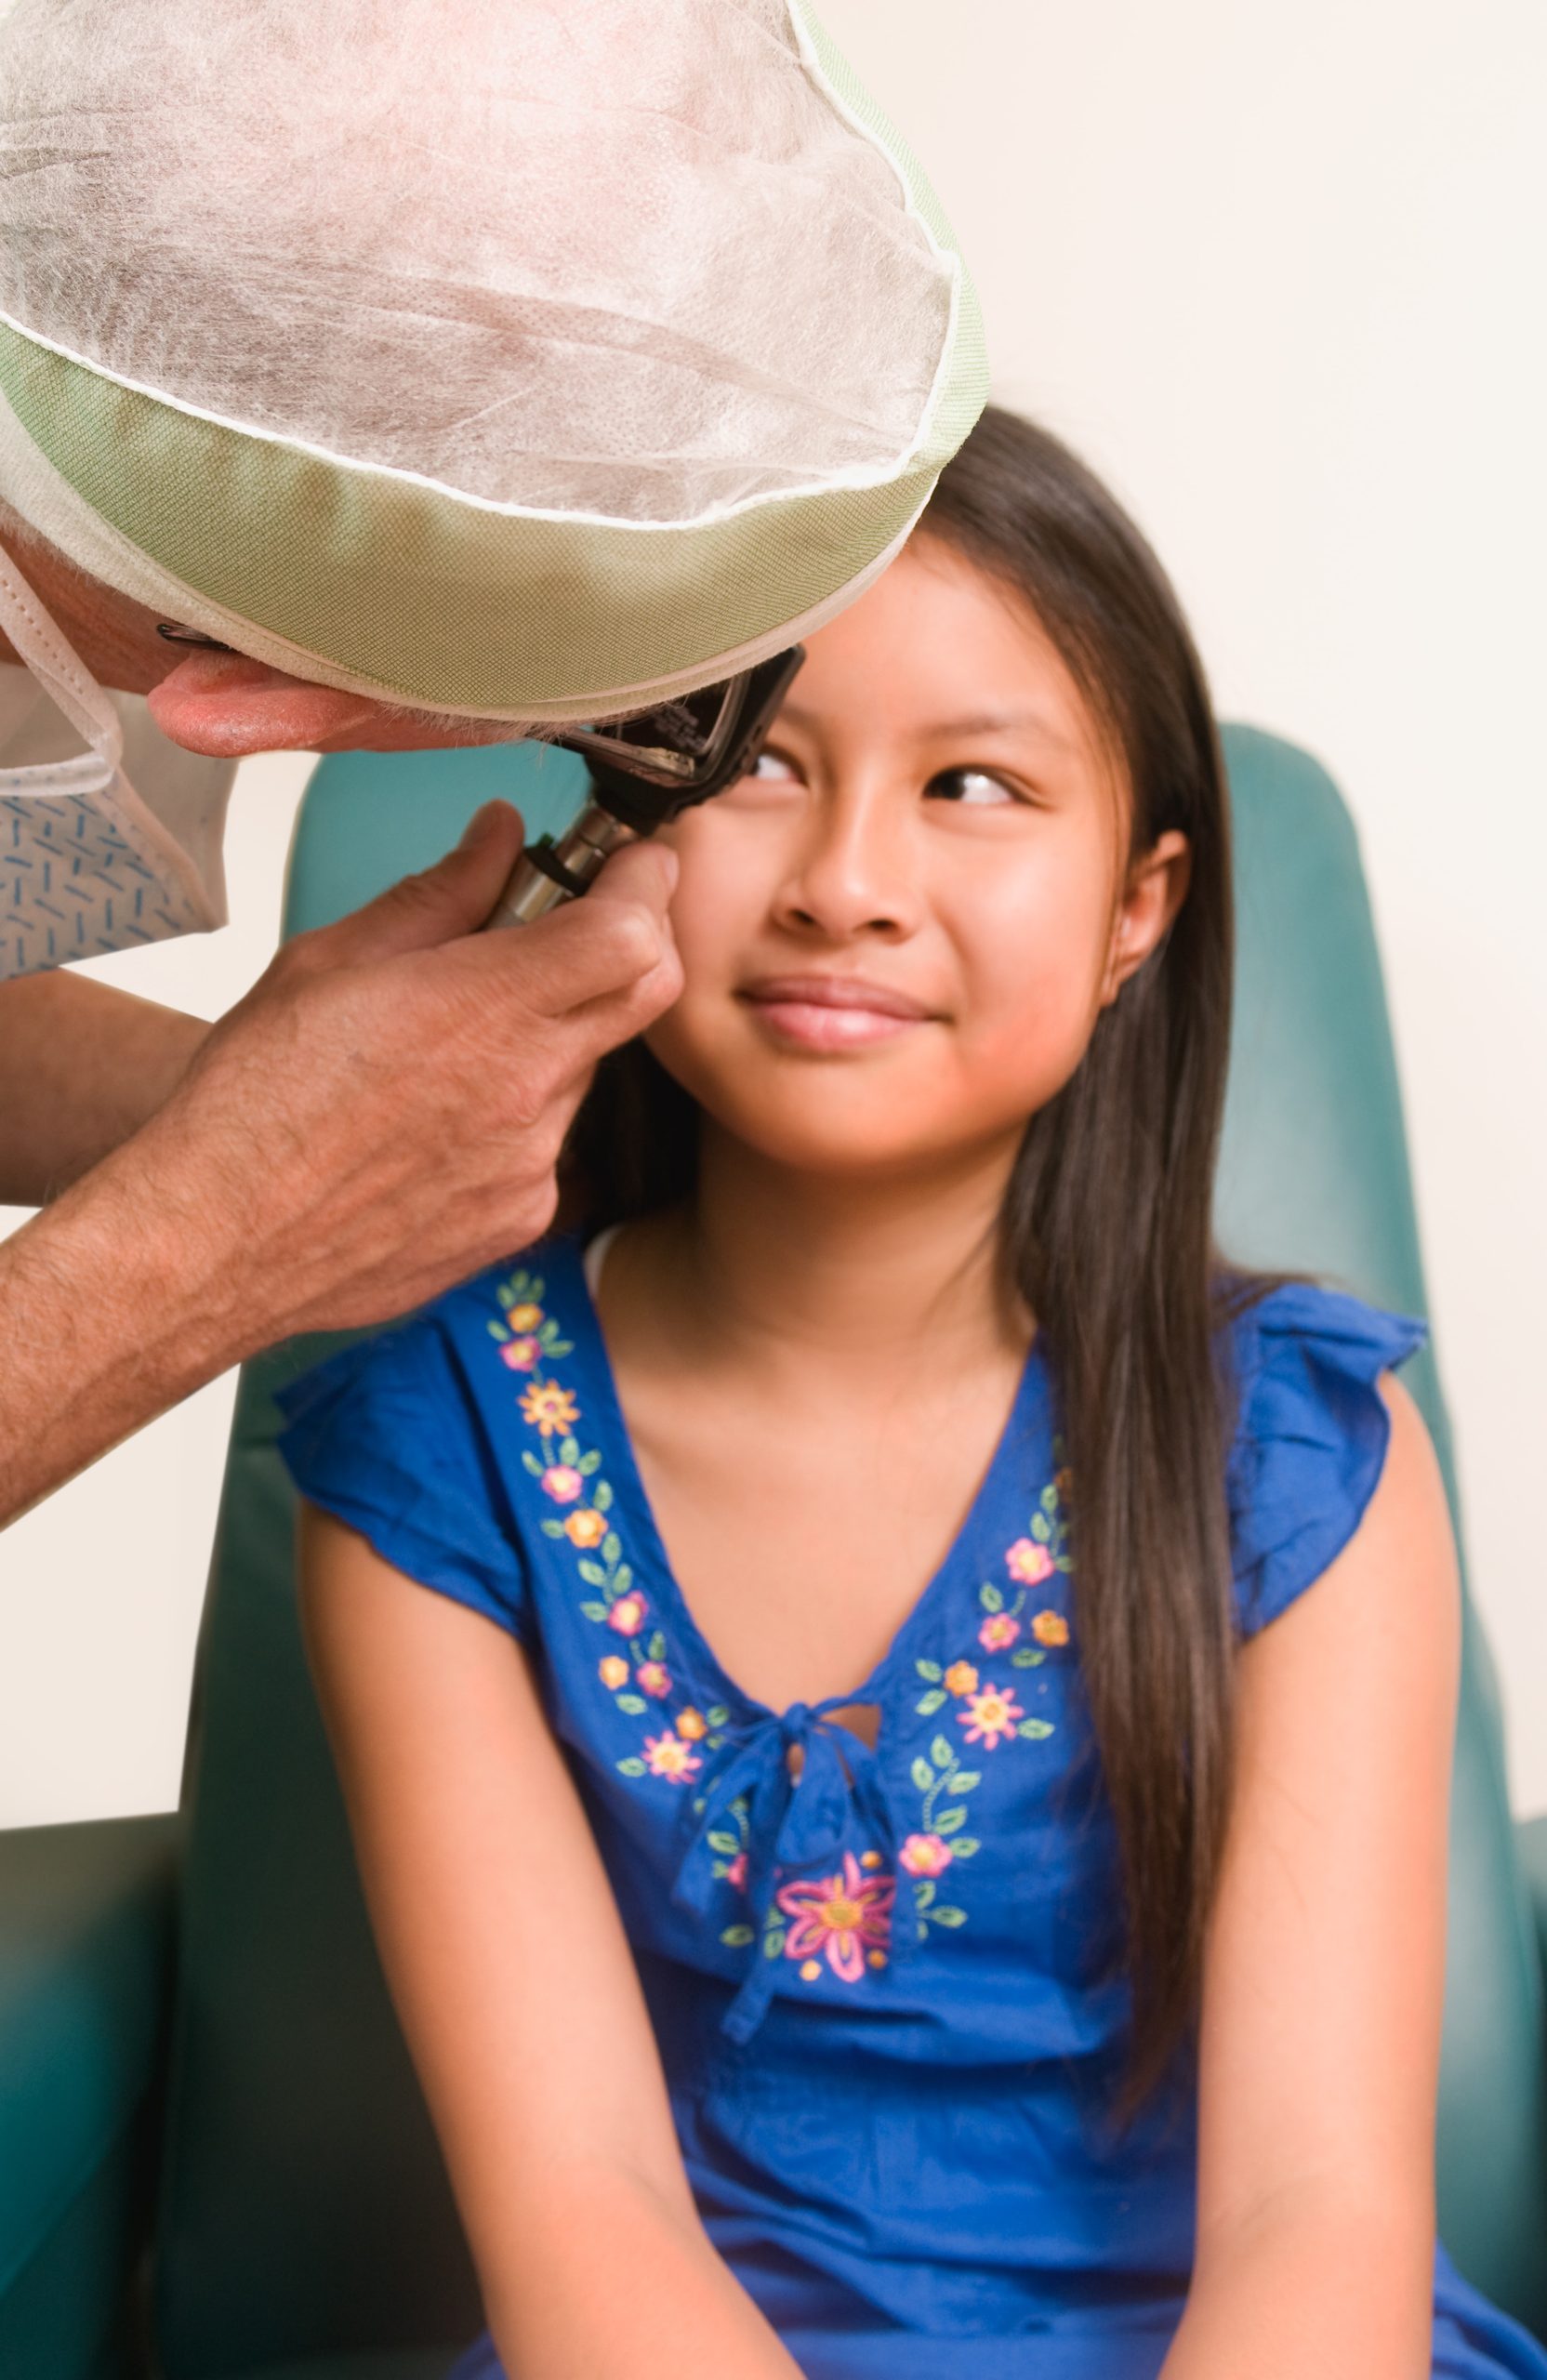 Doctor examining a child's eye.